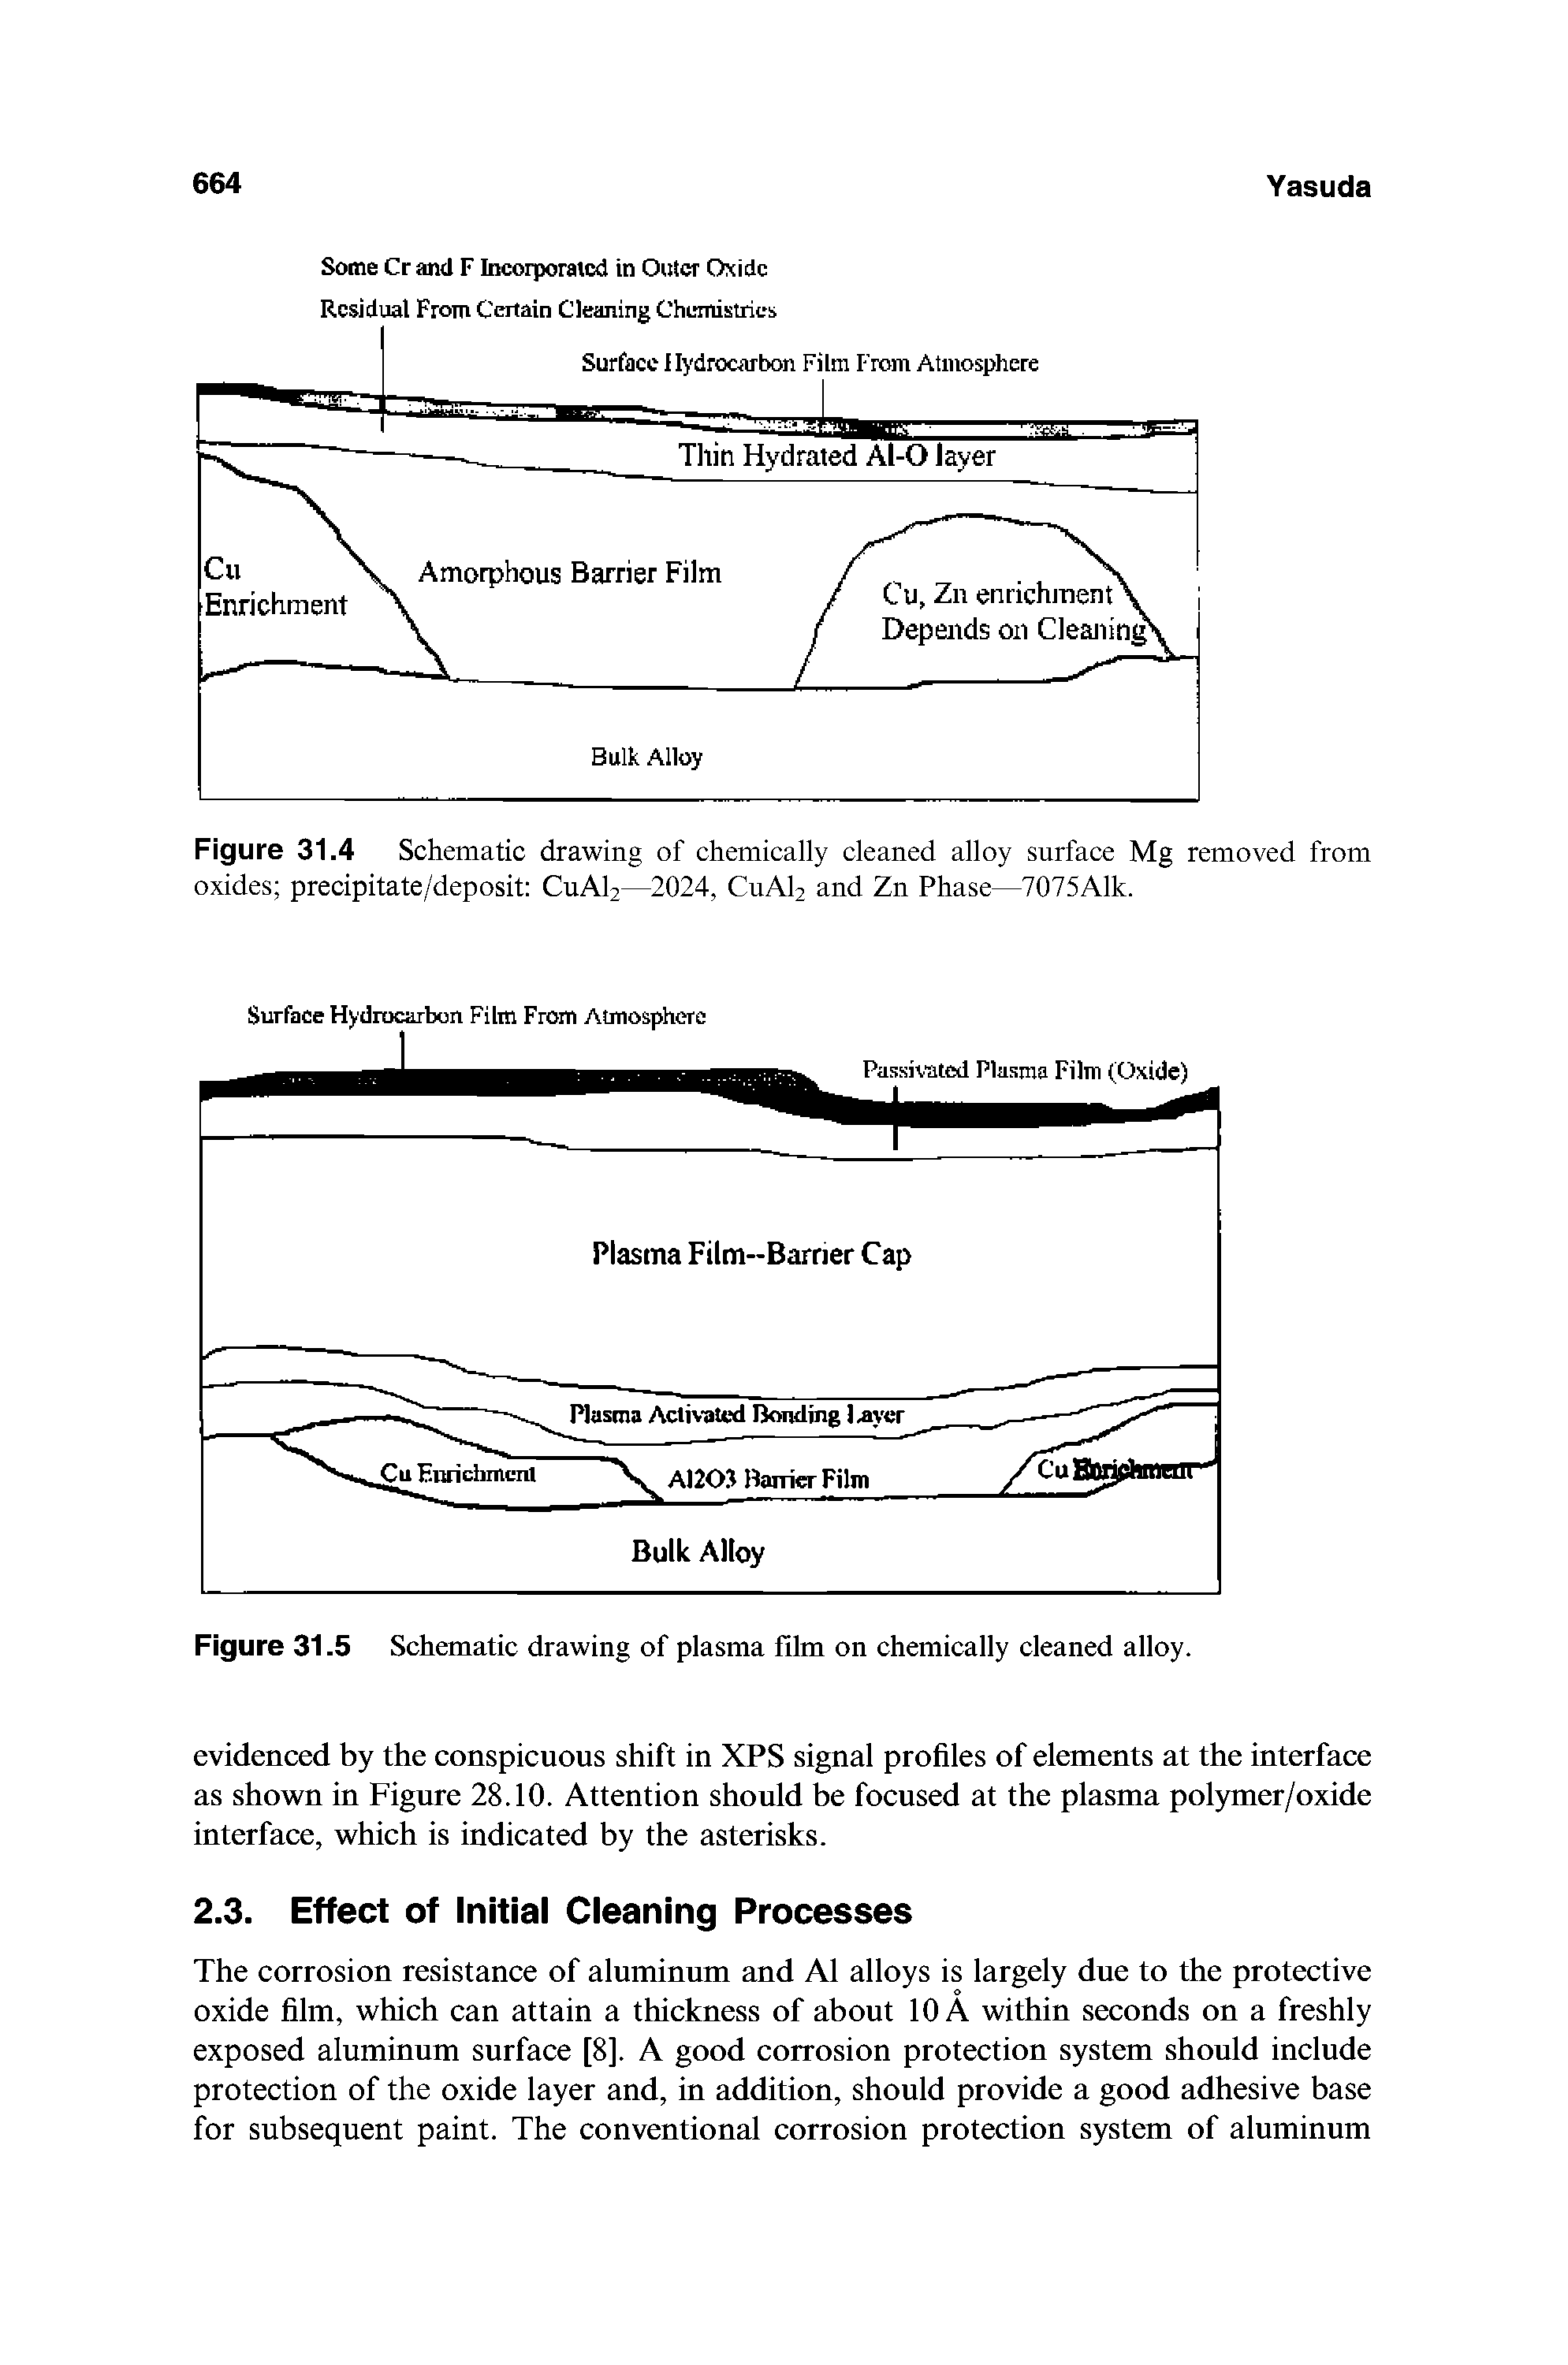 Figure 31.5 Schematic drawing of plasma film on chemically cleaned alloy.